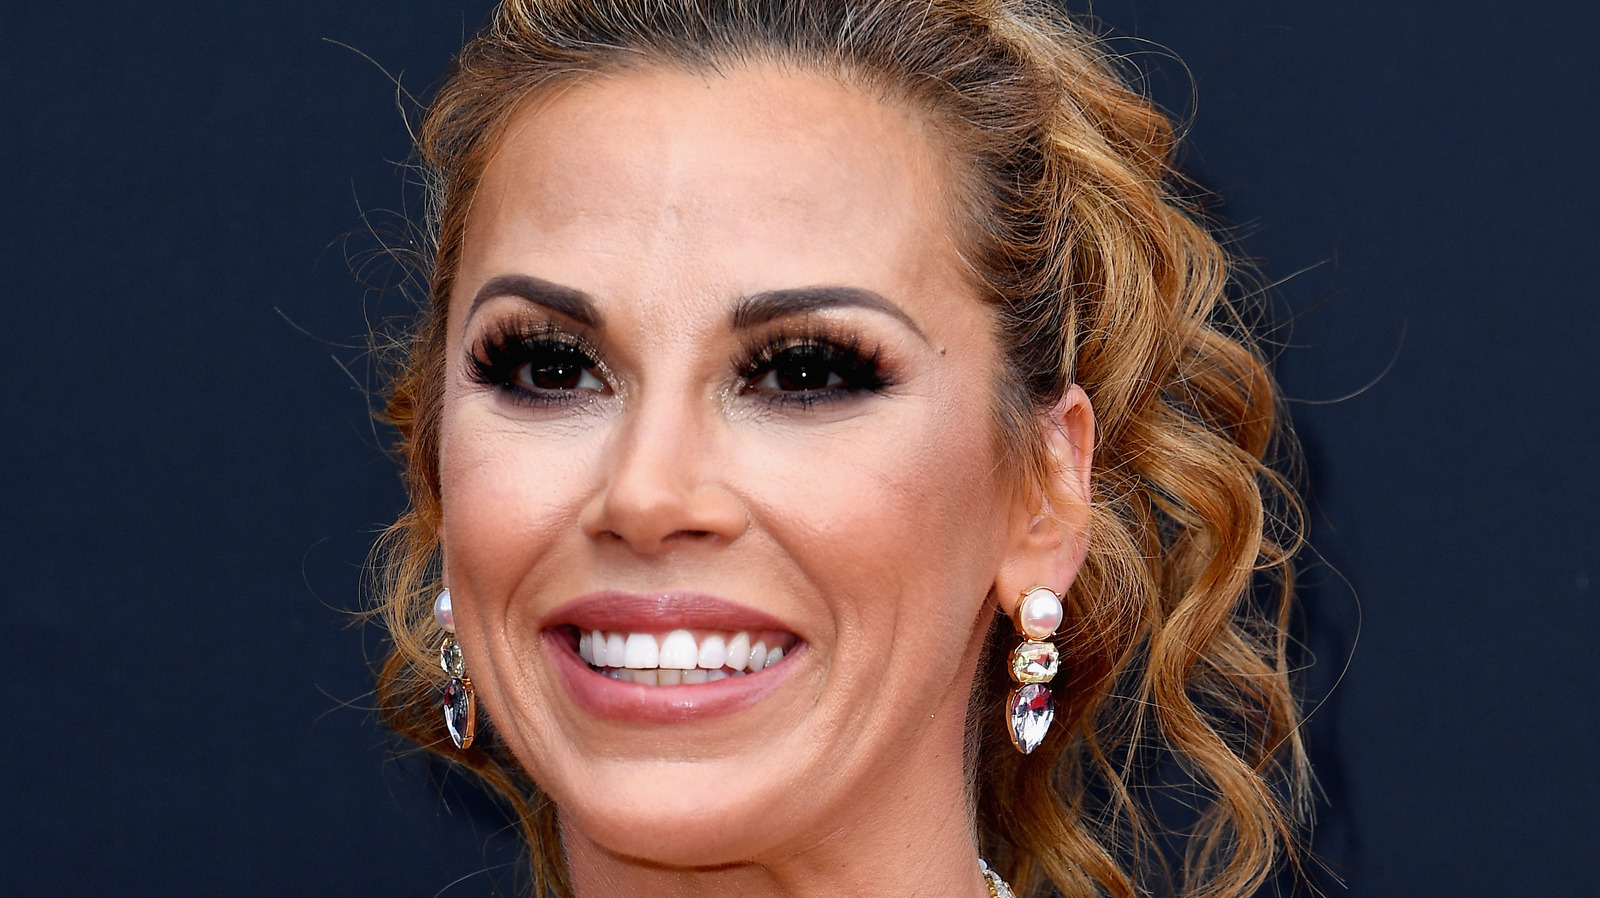 Mickie James Talks About One Of The Scariest Things To Tell A Wrestler And Why It Is